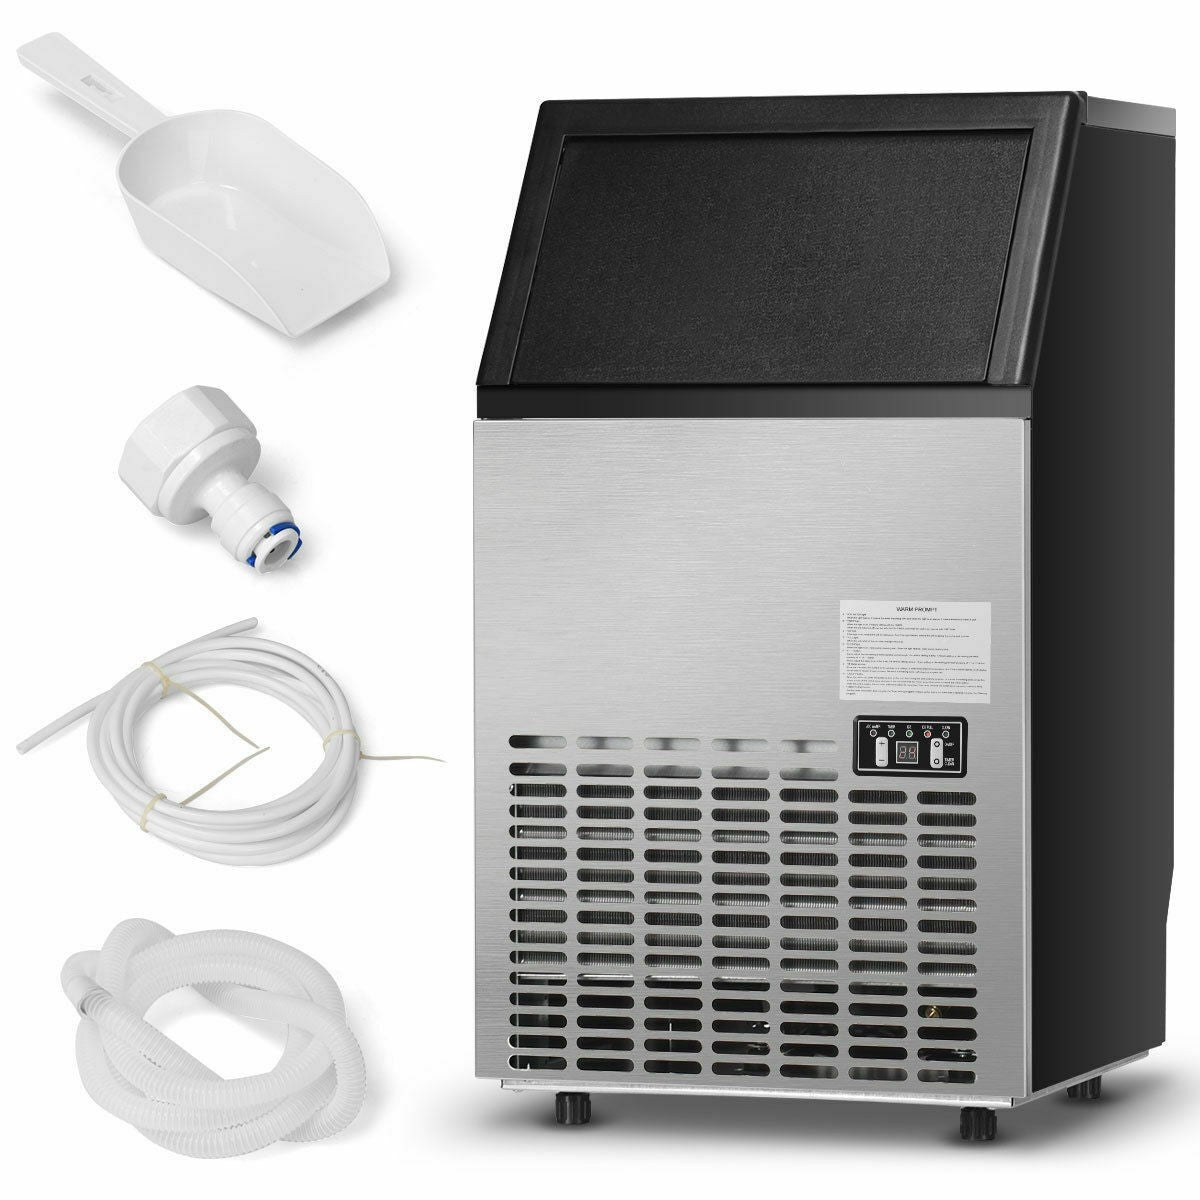 Chairliving Canada Only 110LBS 24H Portable Built-In Stainless Steel Commercial Ice Maker Machine with Full Set of Accessories